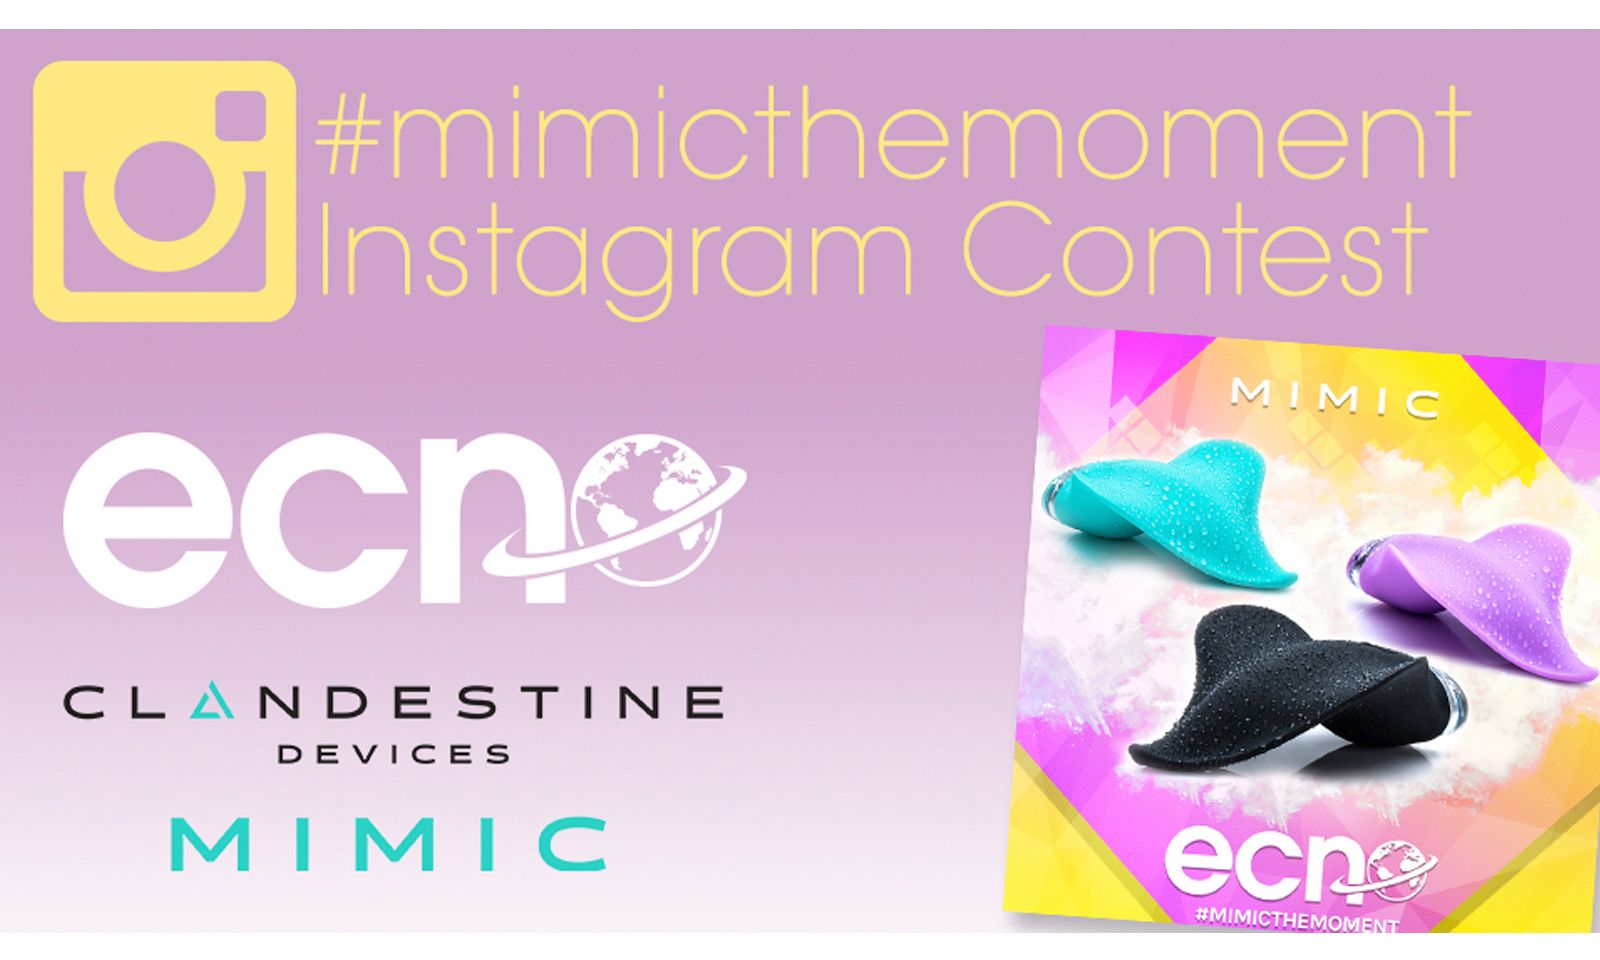 East Coast News, Clandestine Devices Team For Instagram Contest